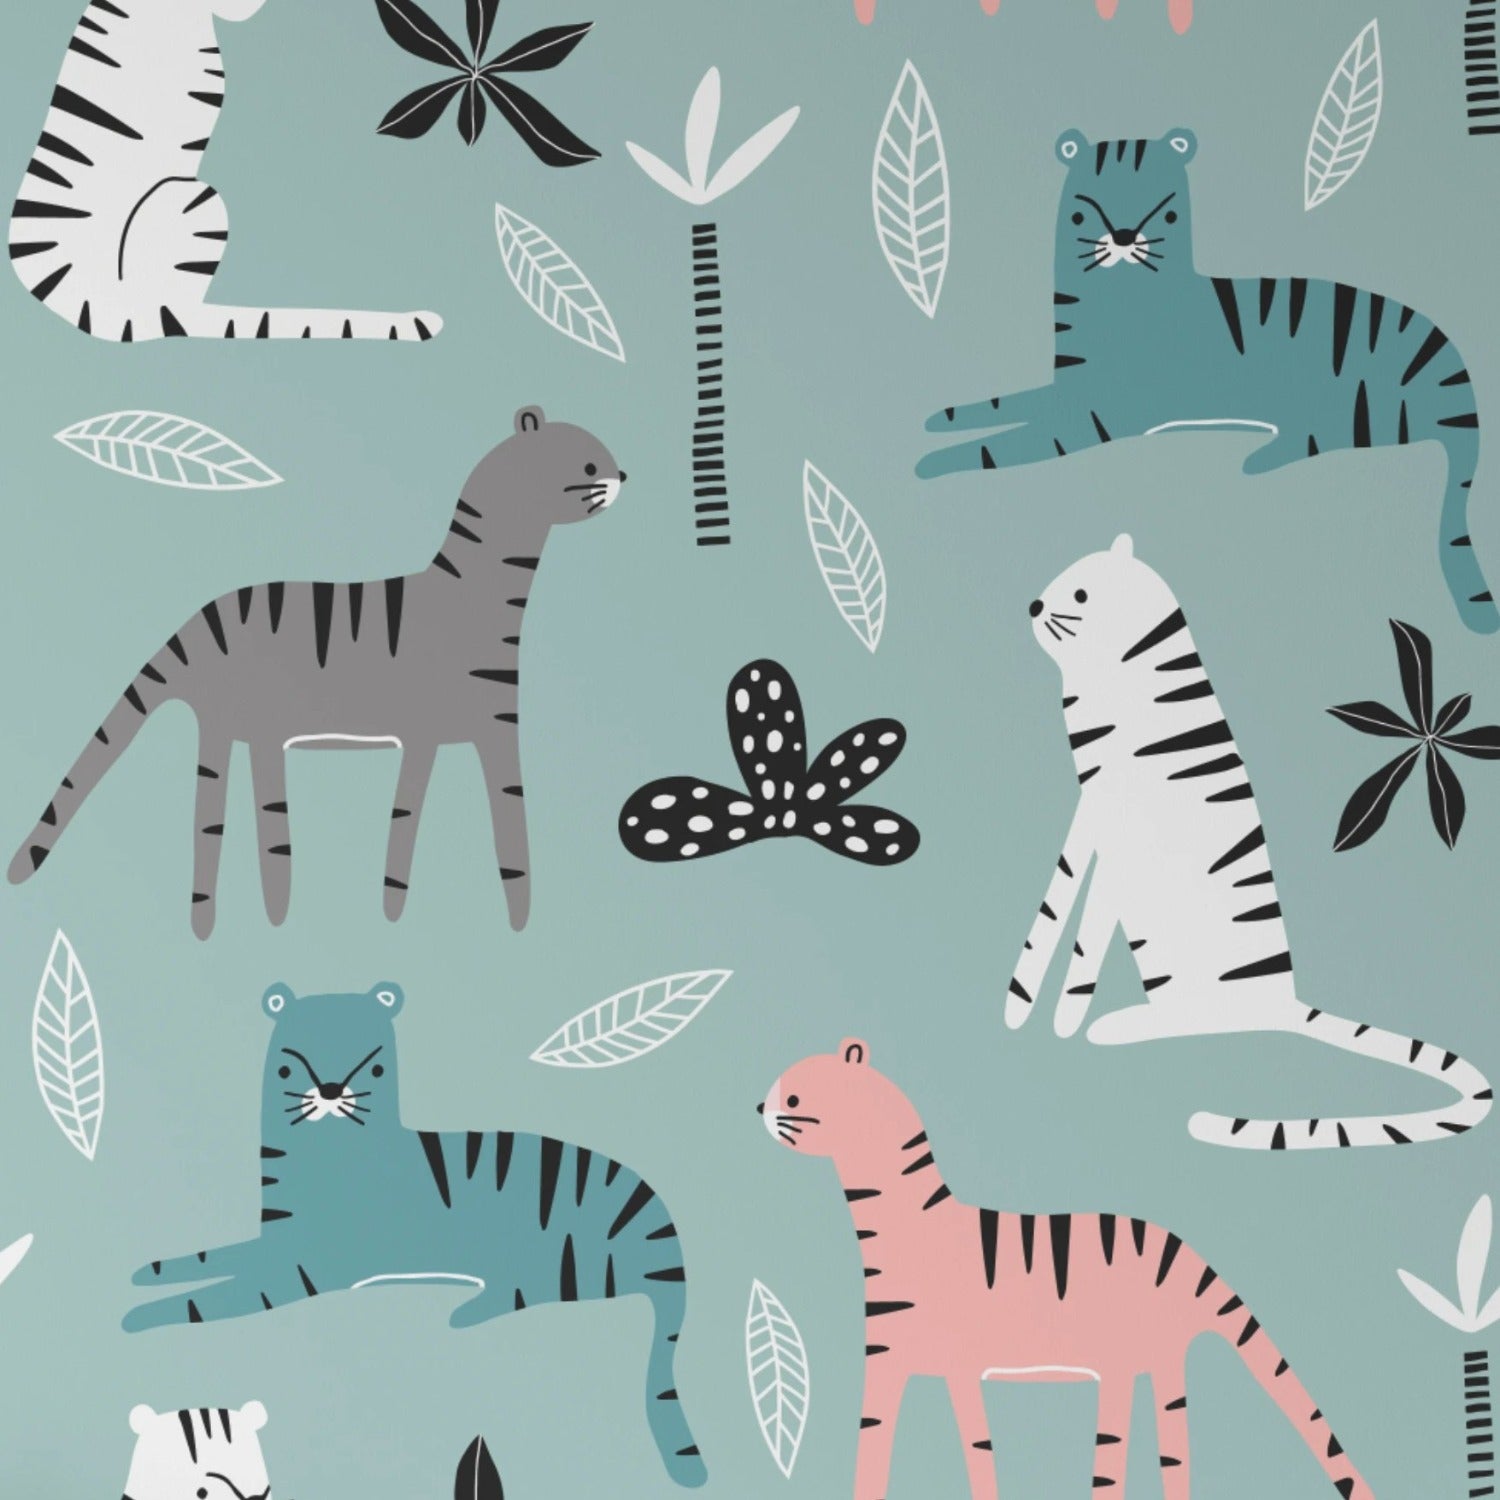 Detailed view of Kids Wallpaper - Tigers with illustrations of tigers, leaves, and flowers on a pale teal background